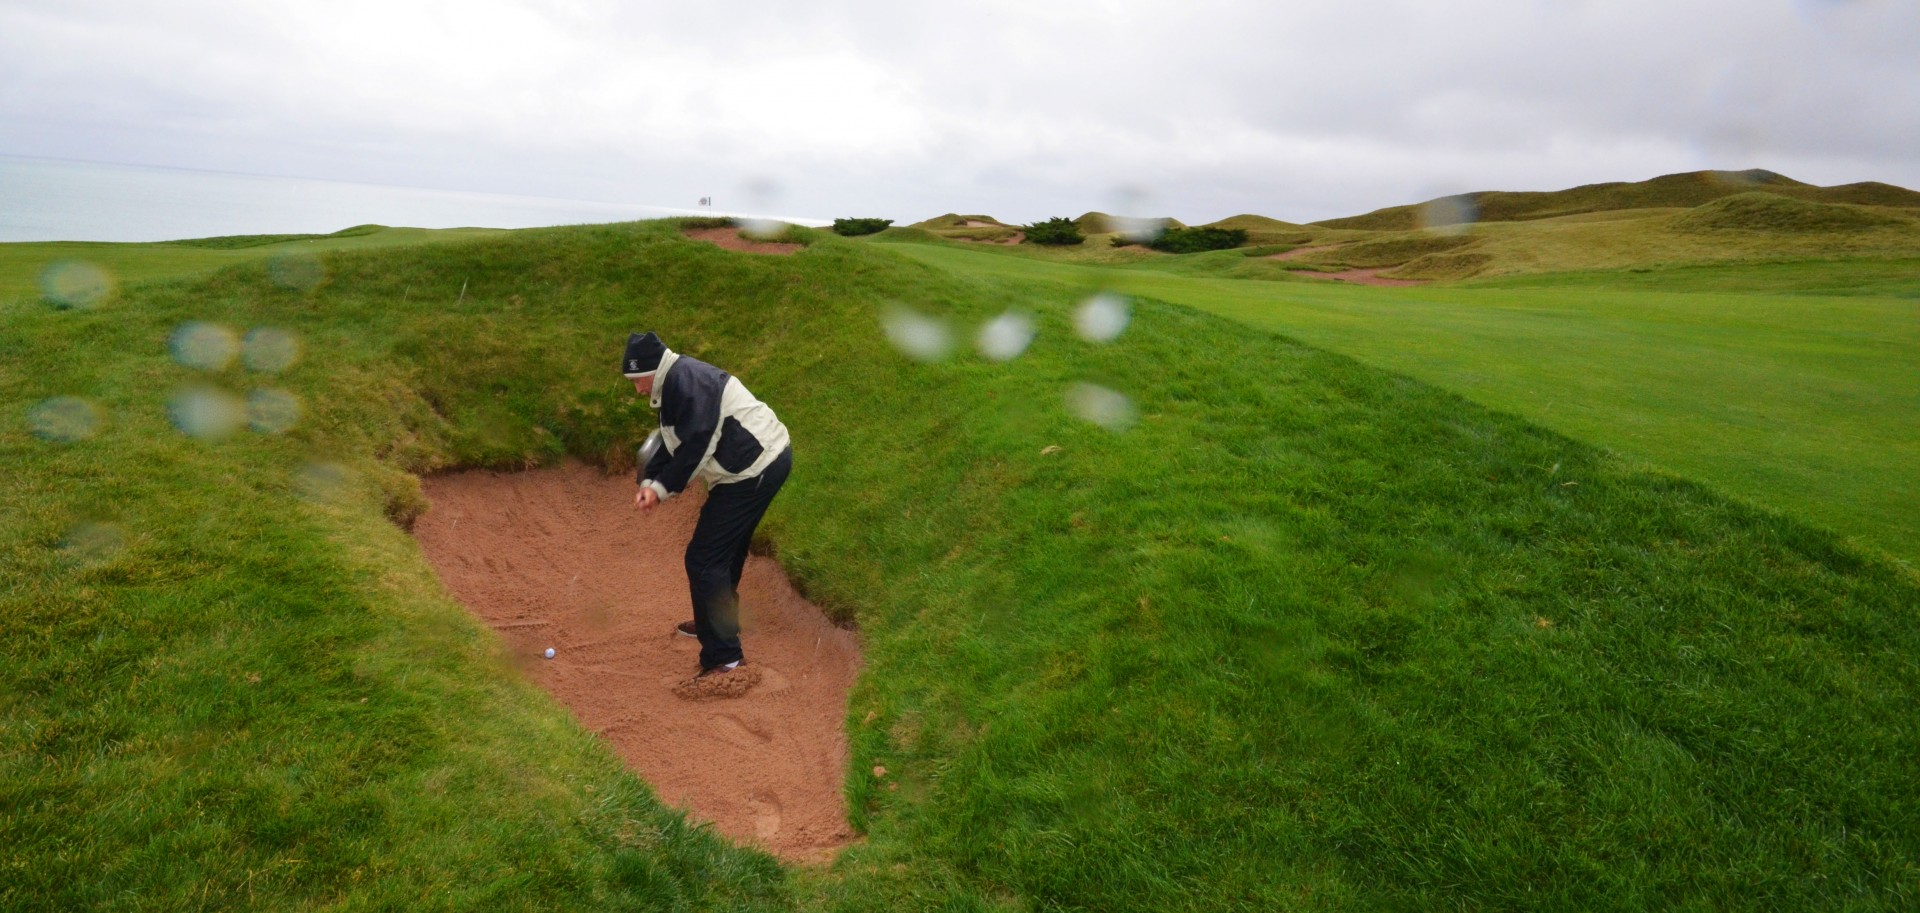 Brian in a typical Whistling Straits Bunker